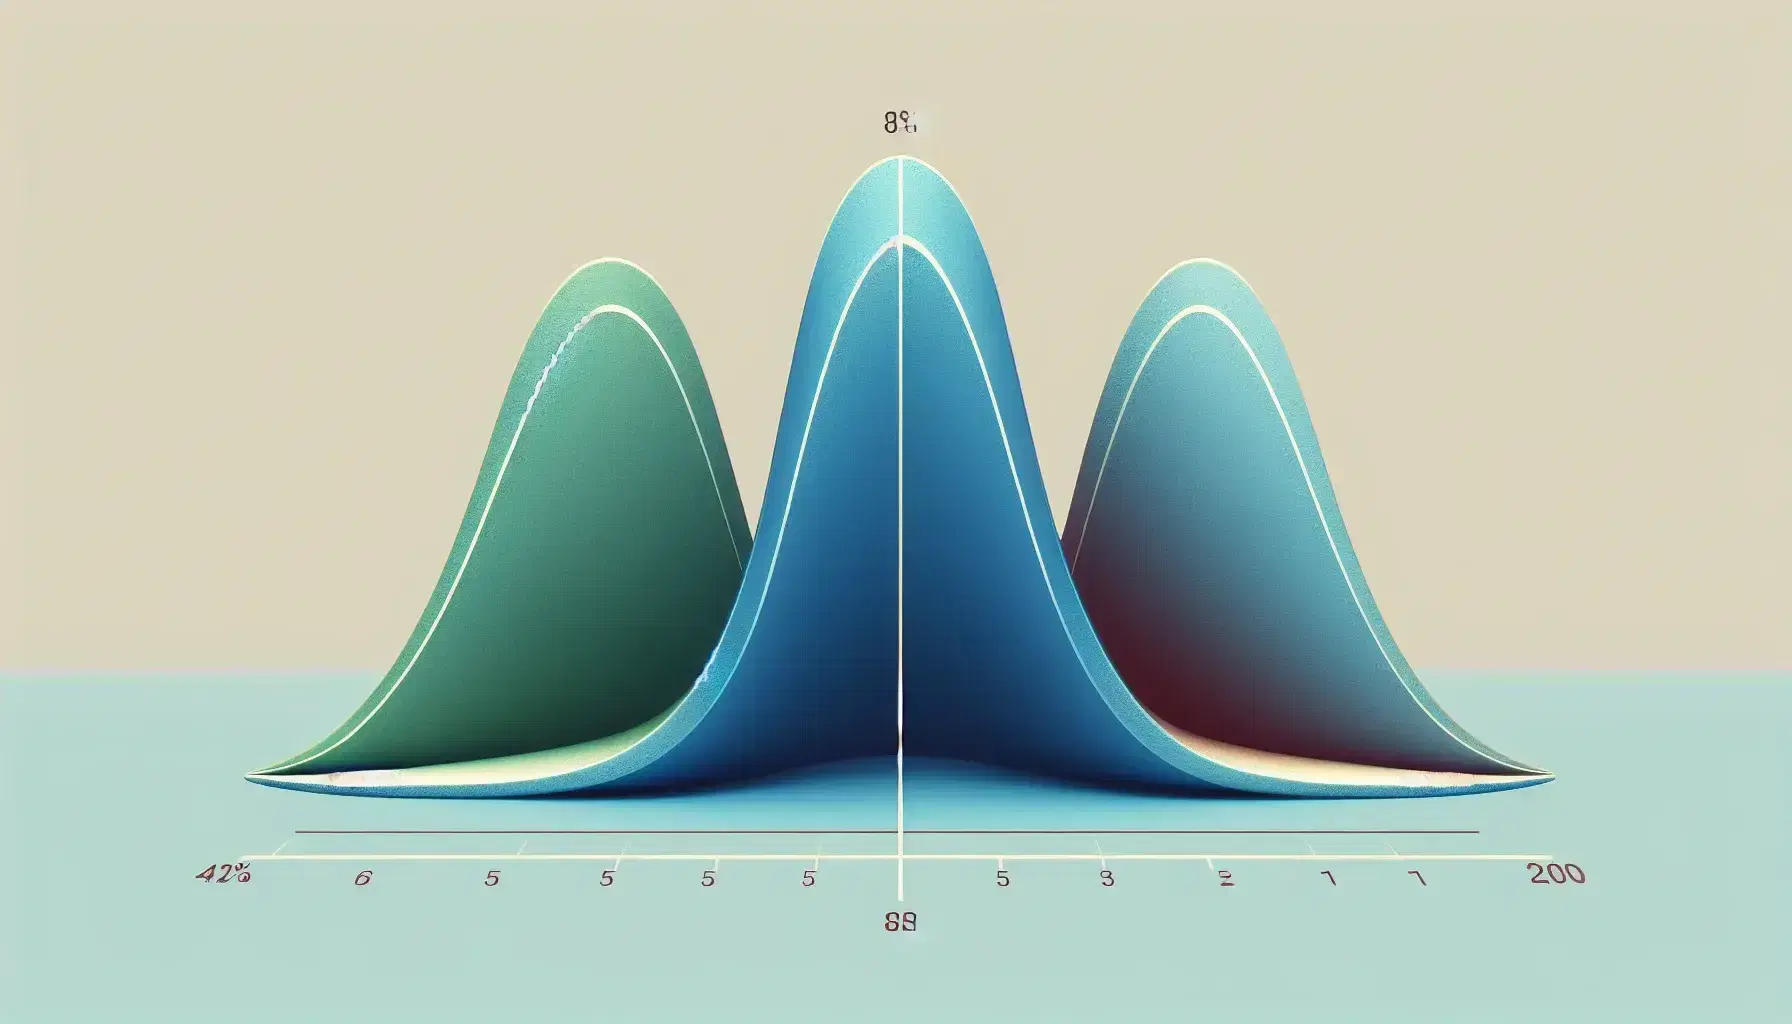 Three bell-shaped curves aligned on the same mean, varying in width and height, with colors blue, green, and red, representing different data distributions.